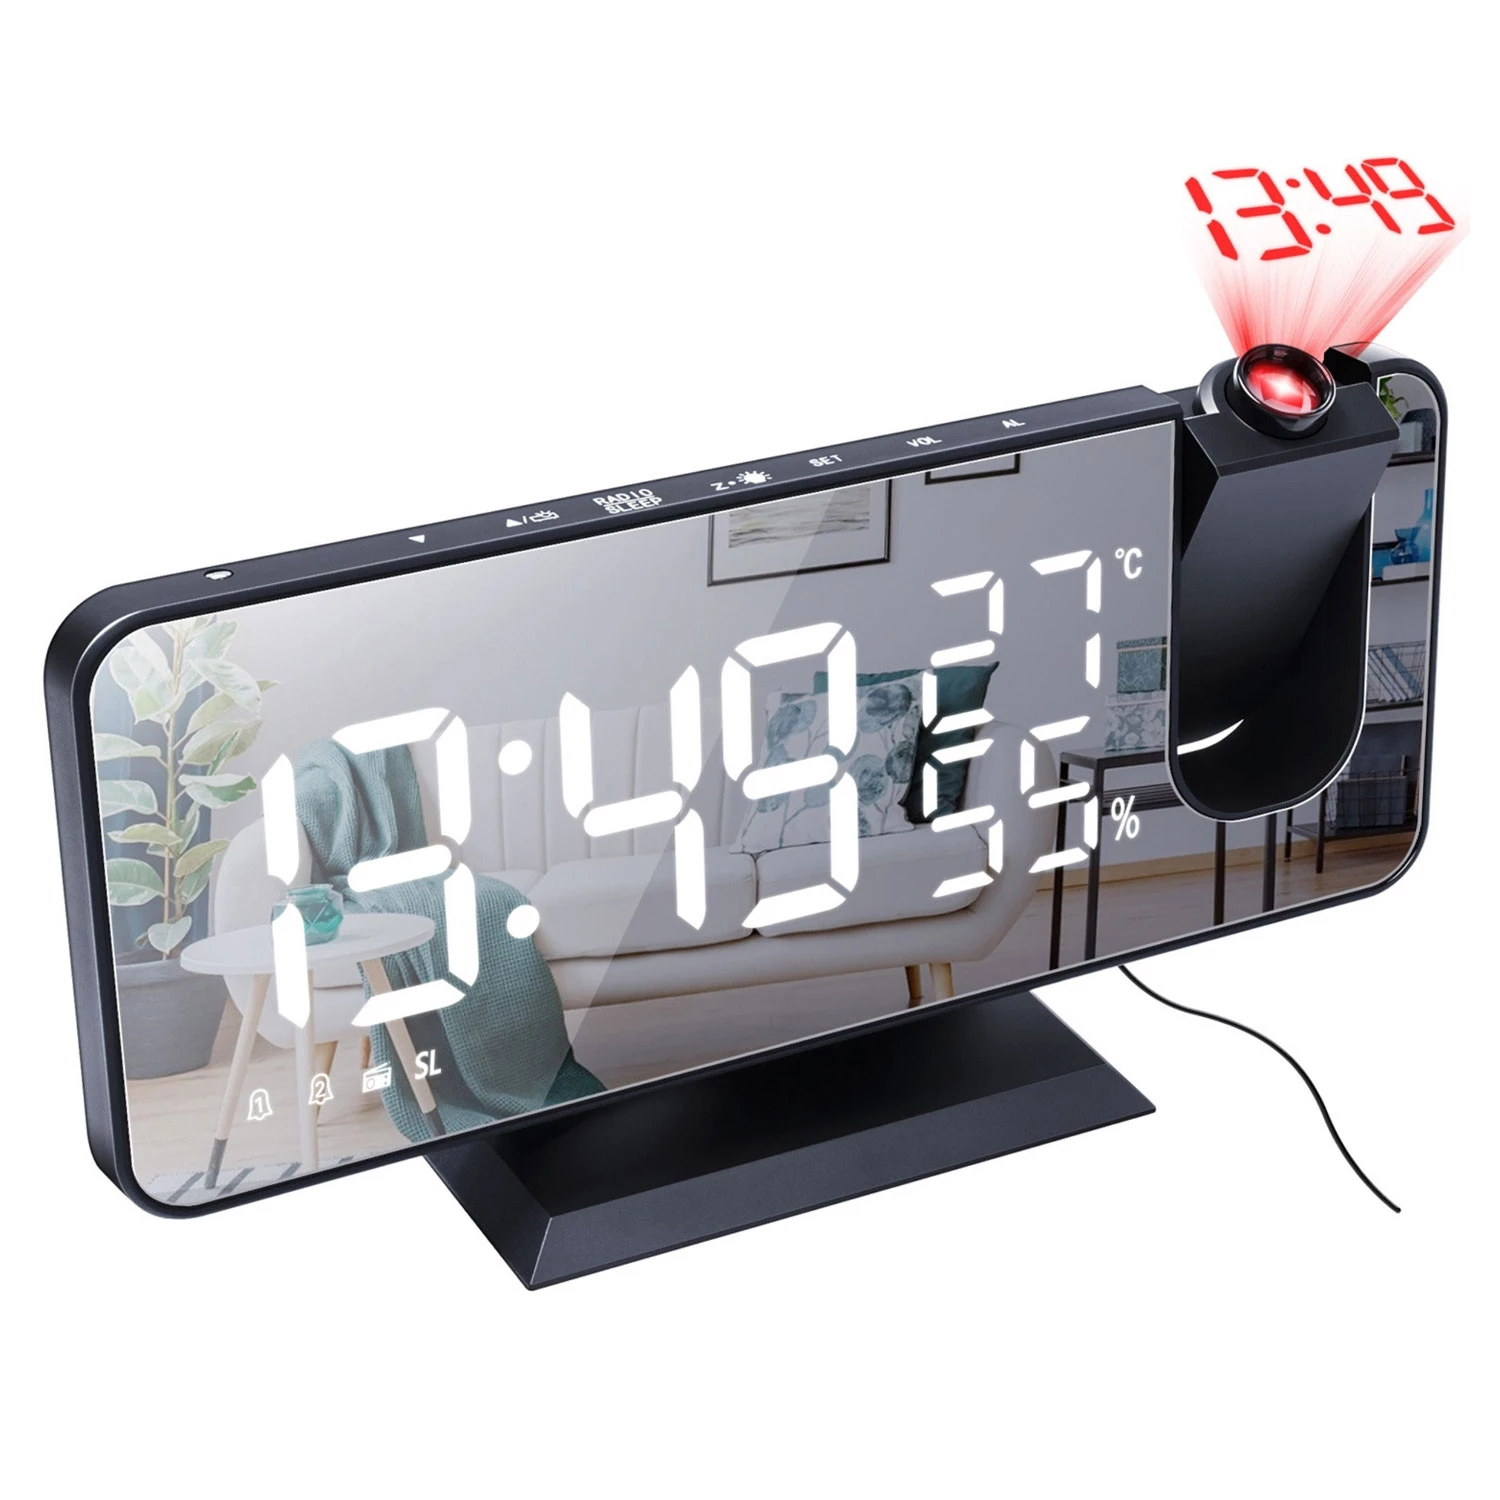 Mirror LED Projection Alarm Clock - Dual Alarms, USB Port, 4 Dimmer, 12/24 Hour